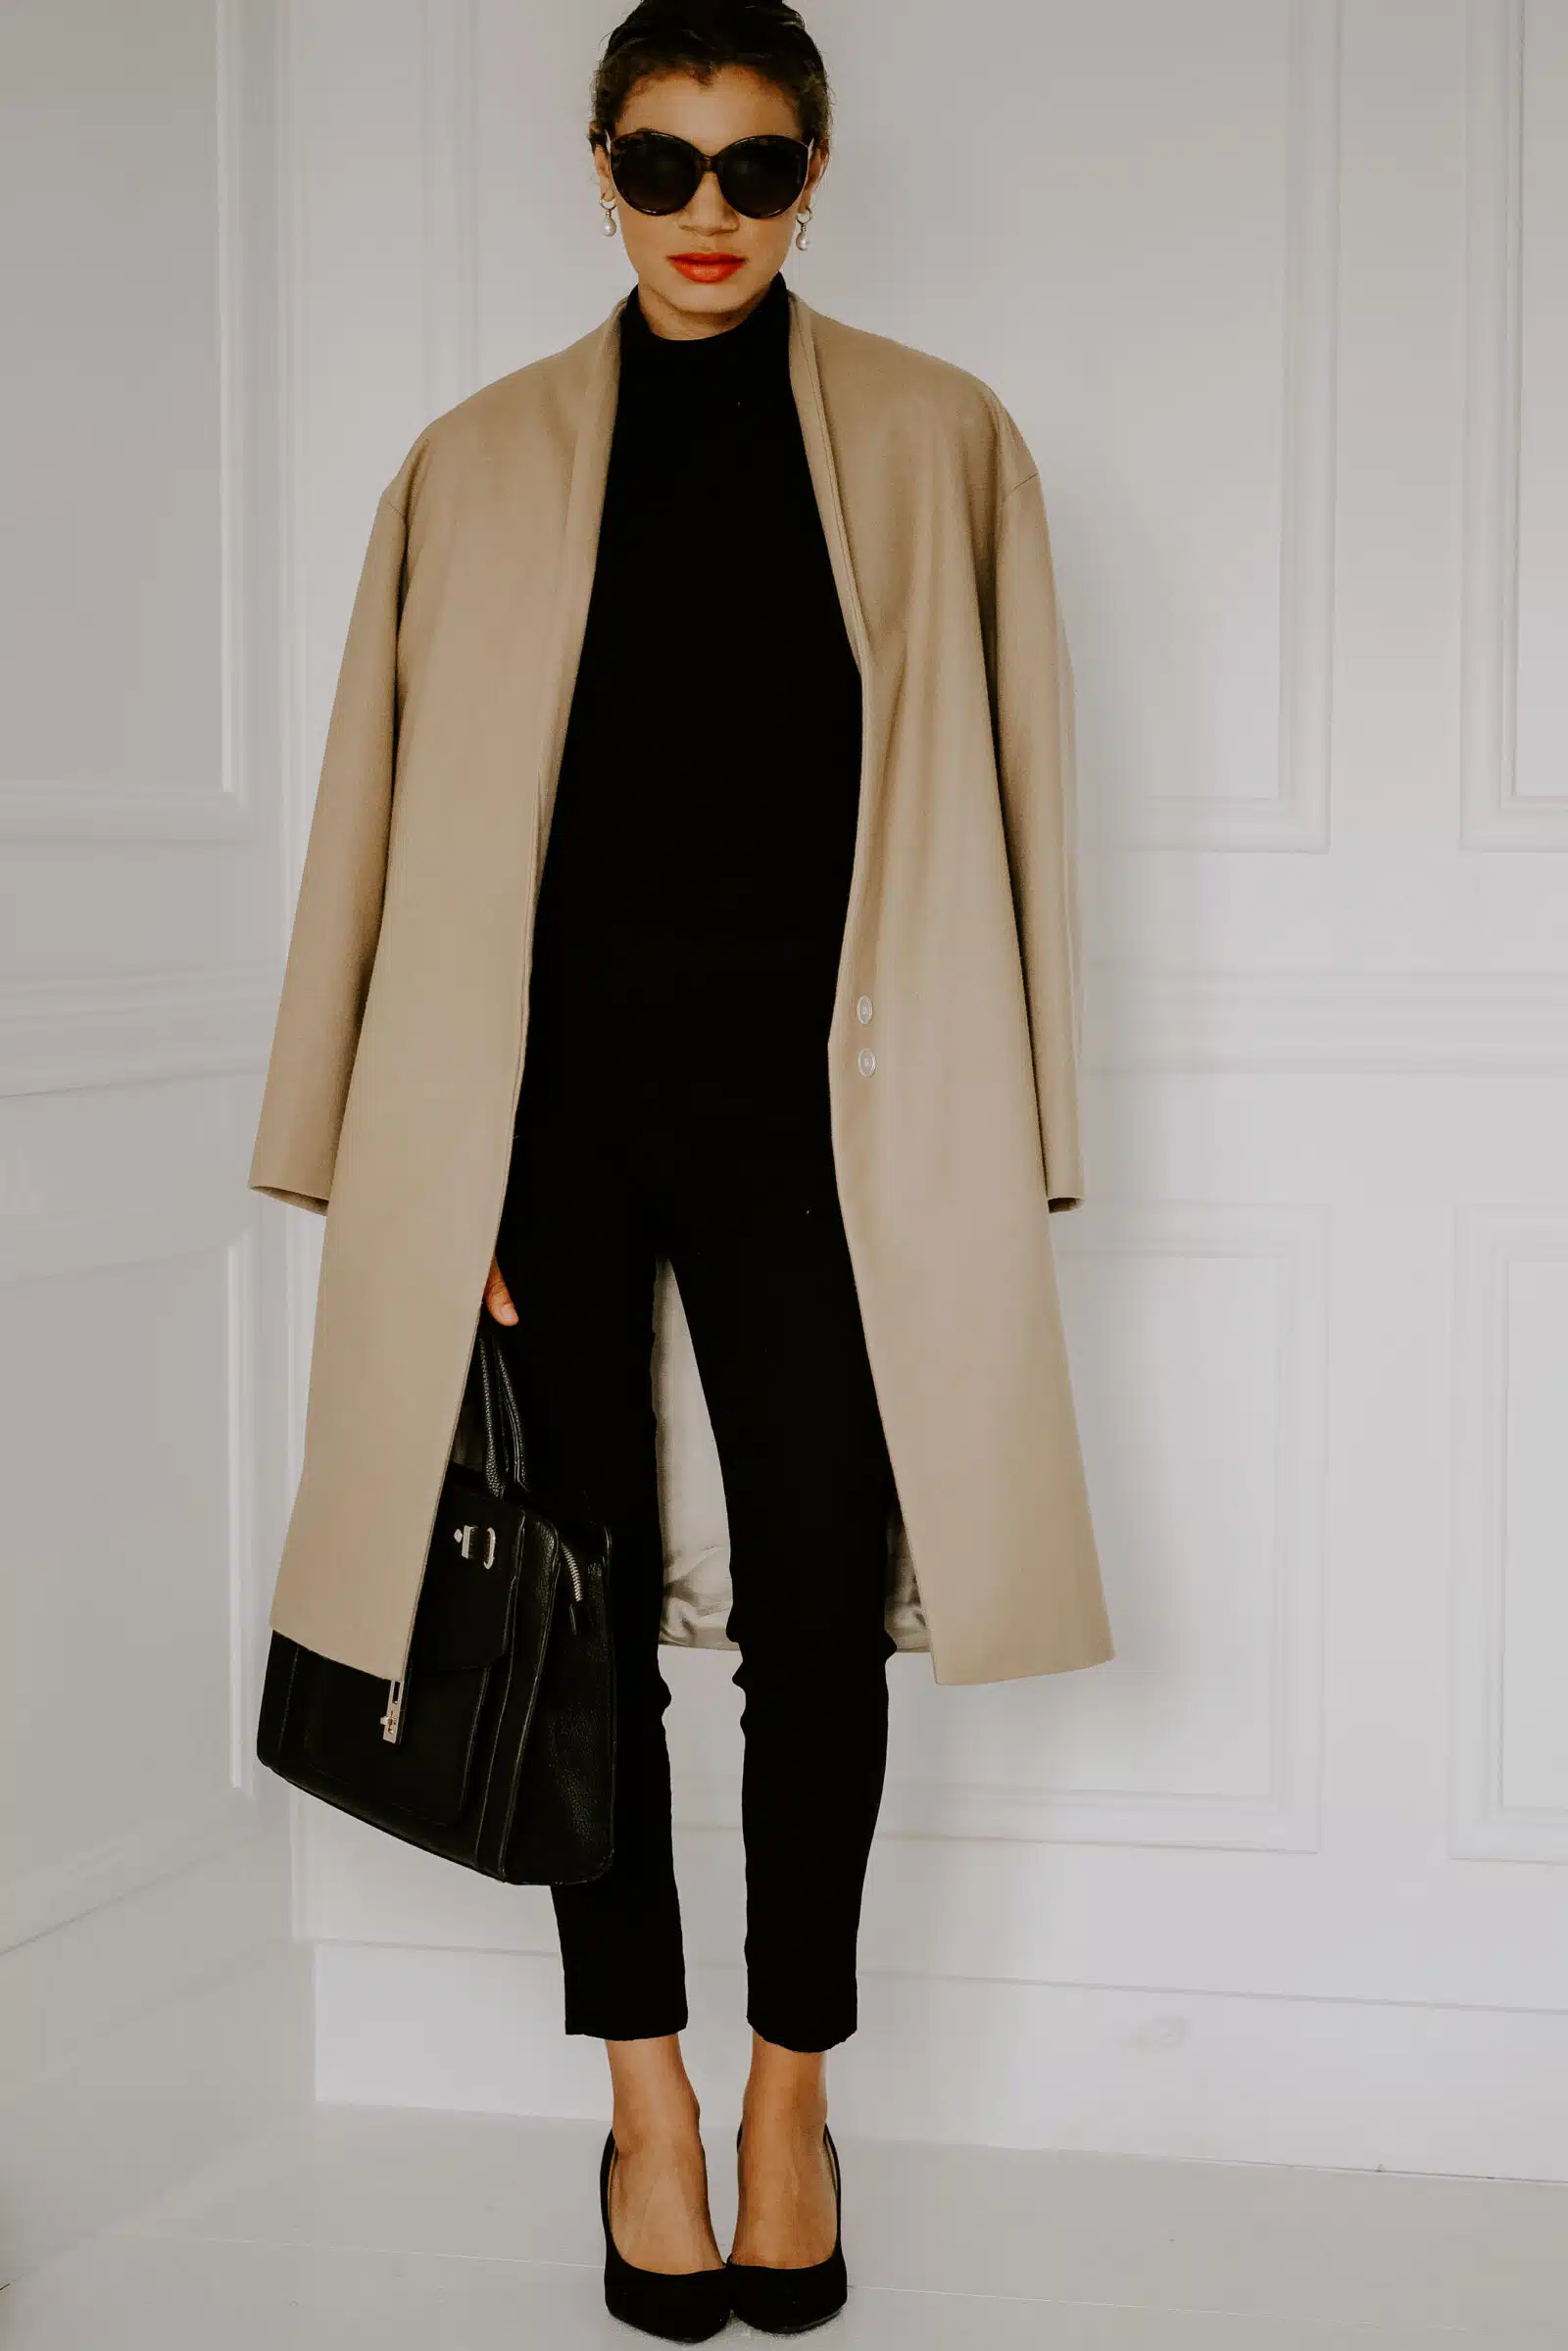 camel coat outfit